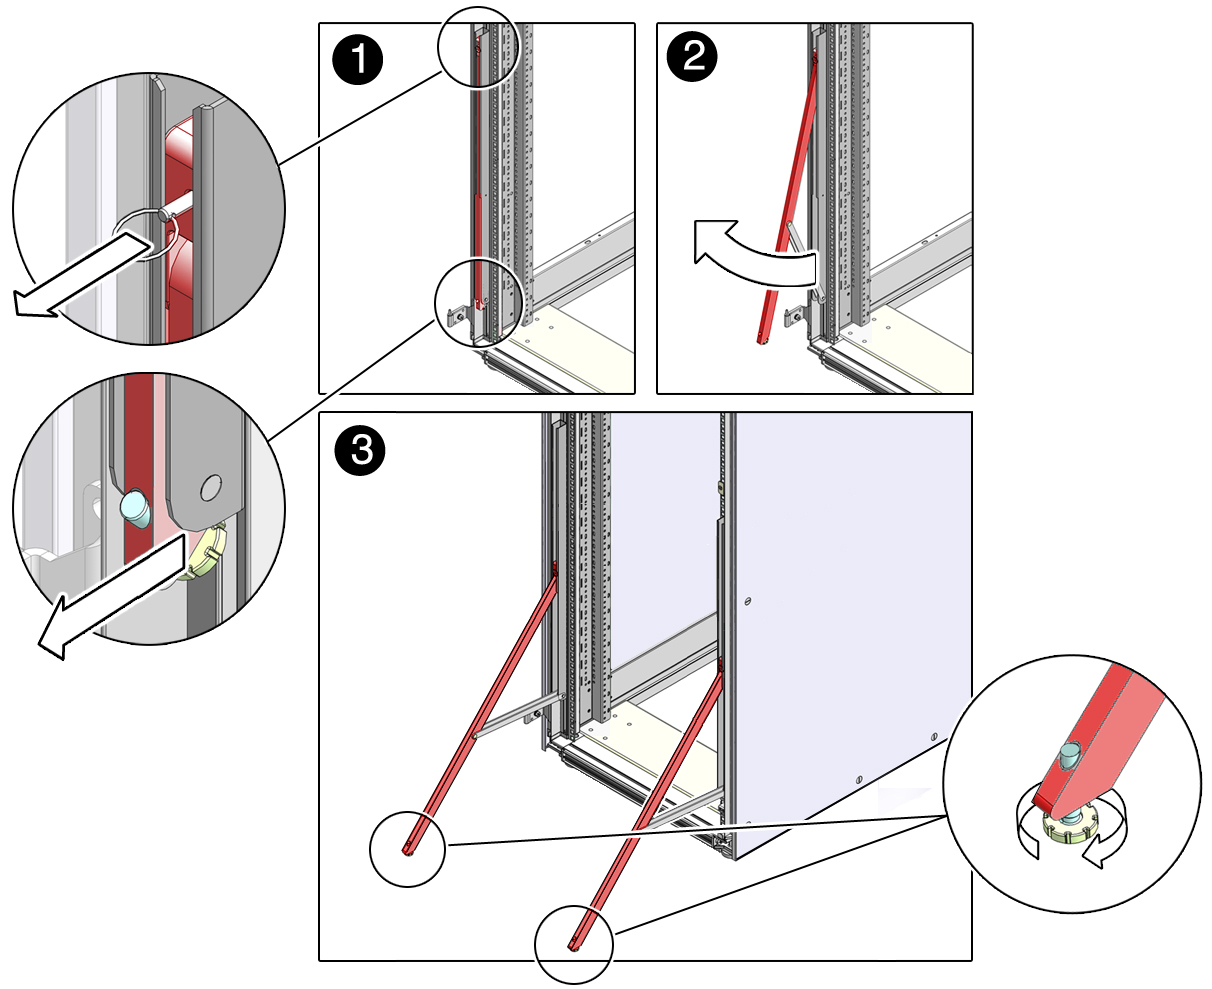 image:Figure showing how to extend the rack's antitilt legs.